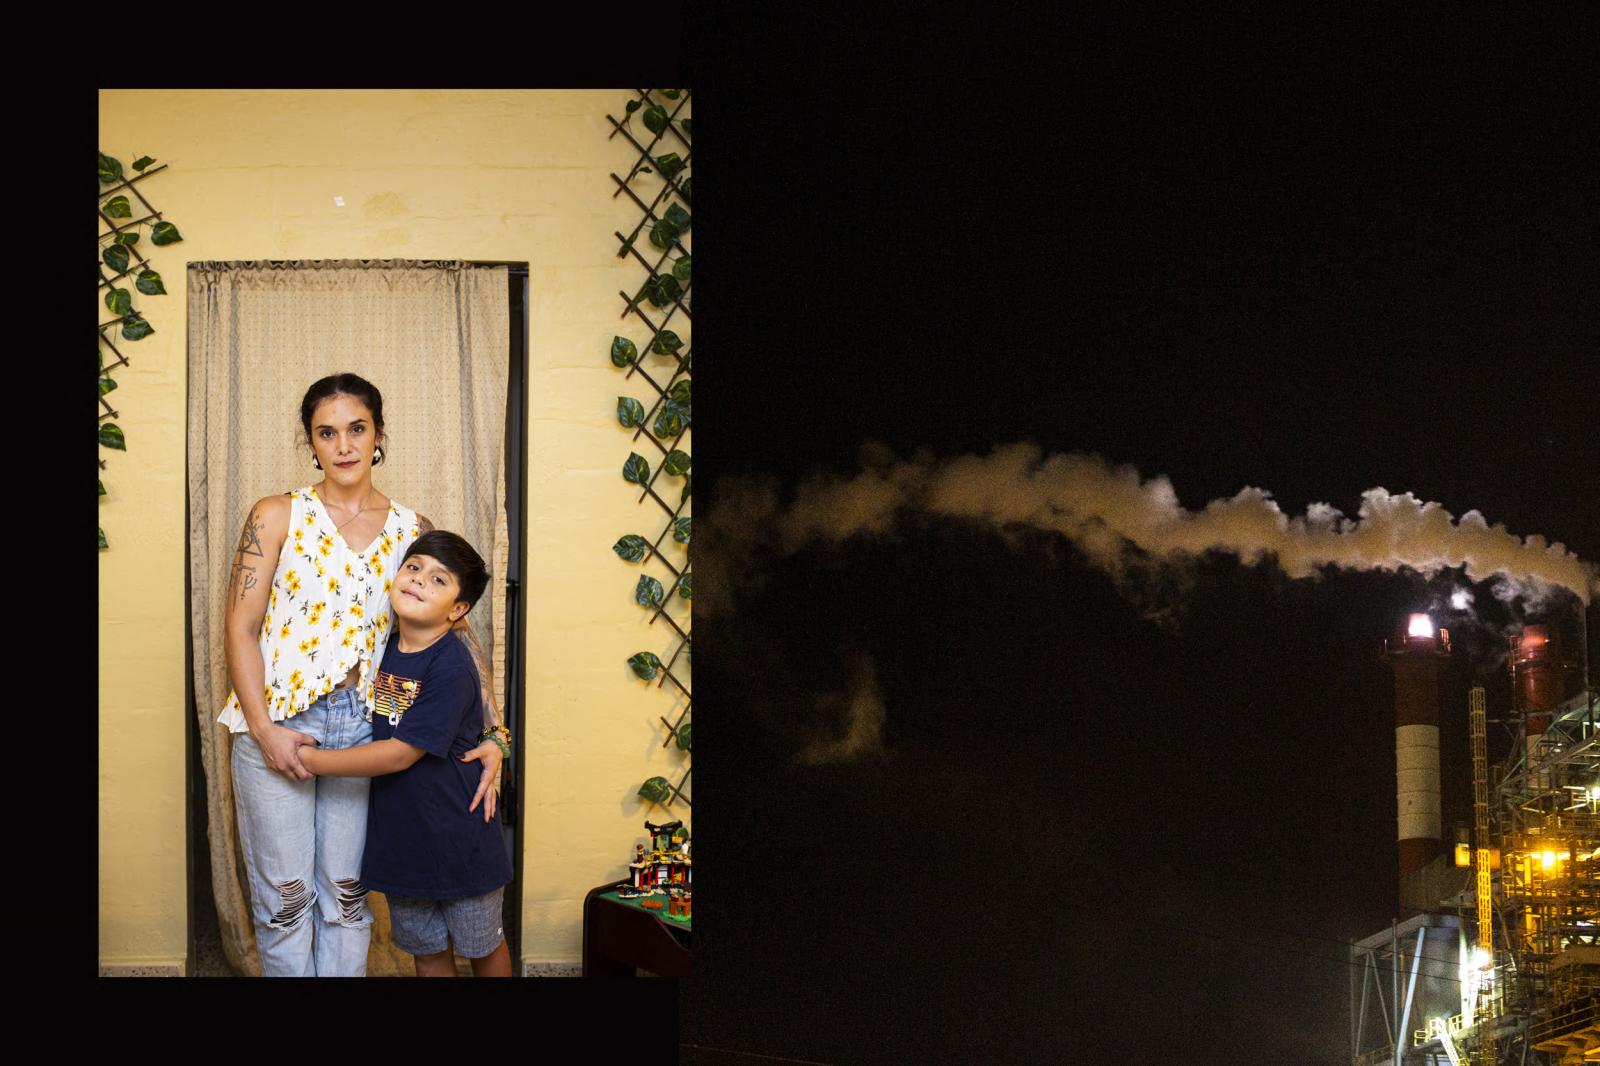 For NYTimes: Power Outages in P.R. - Ashlee Vega and her son, Sebastián, pose for a portrait at their home in Aguadilla, P.R., on...